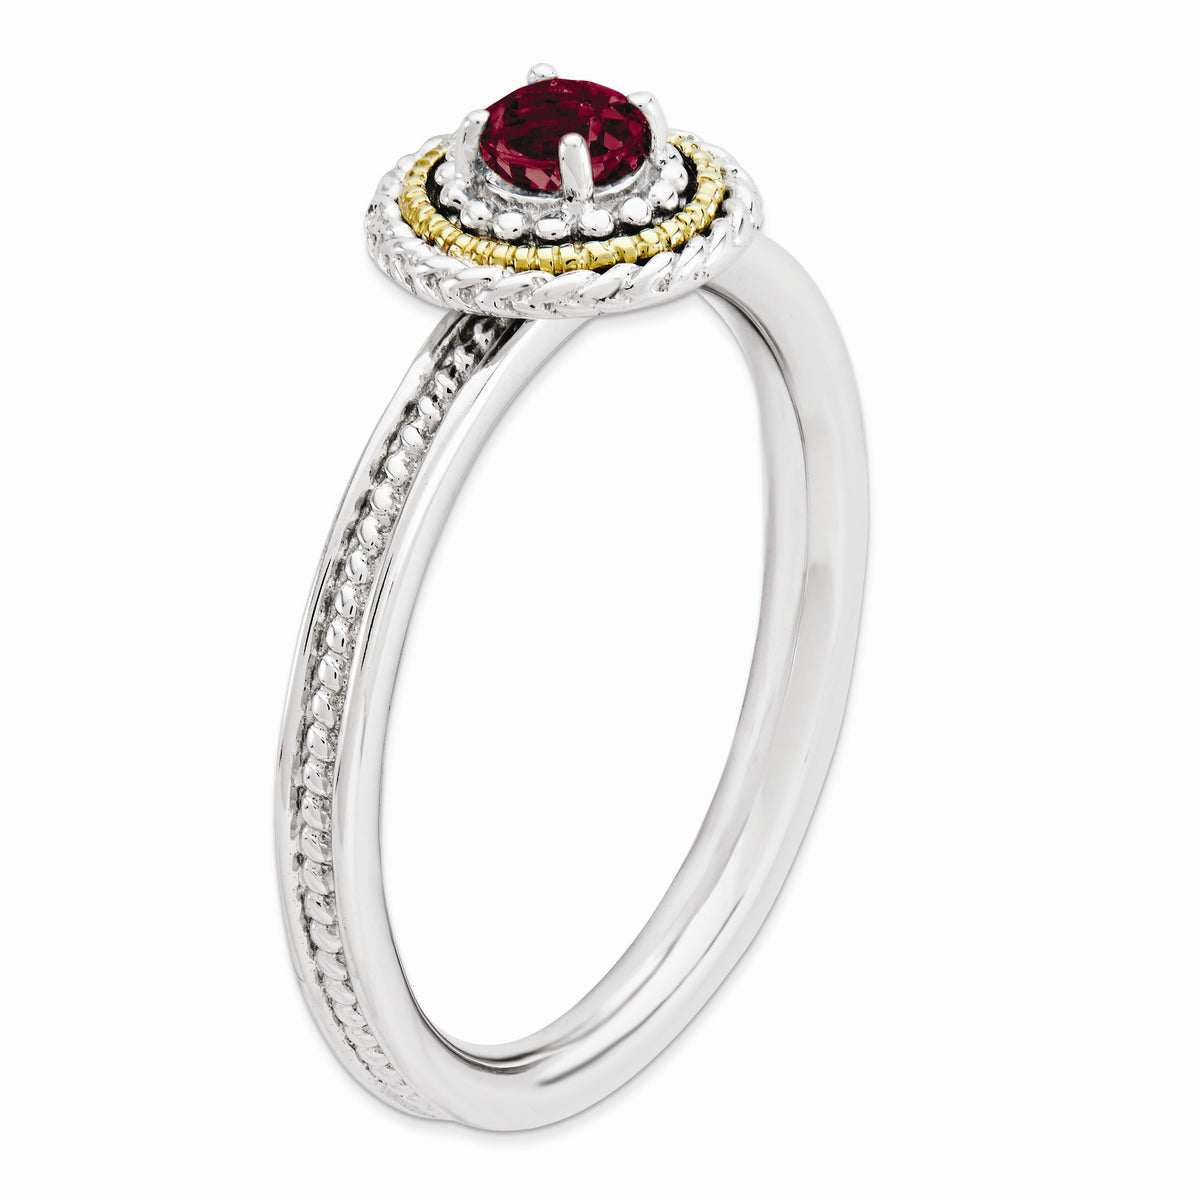 Alternate view of the Sterling Silver14k Yellow Gold PlateGarnet Stackable 9mm Round Ring by The Black Bow Jewelry Co.